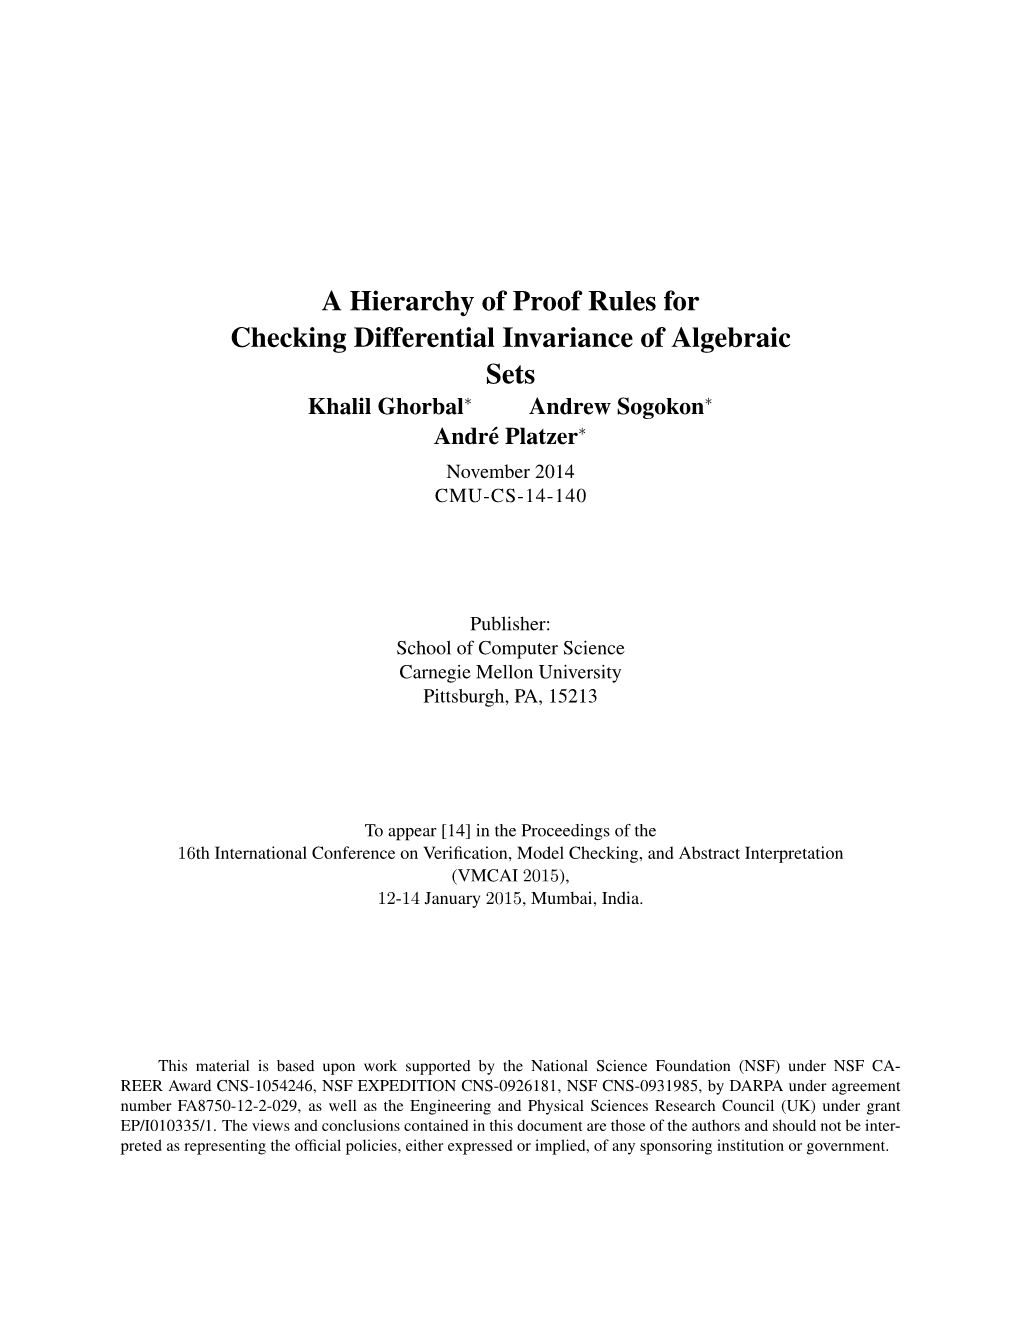 A Hierarchy of Proof Rules for Checking Differential Invariance of Algebraic Sets Khalil Ghorbal∗ Andrew Sogokon∗ Andre´ Platzer∗ November 2014 CMU-CS-14-140